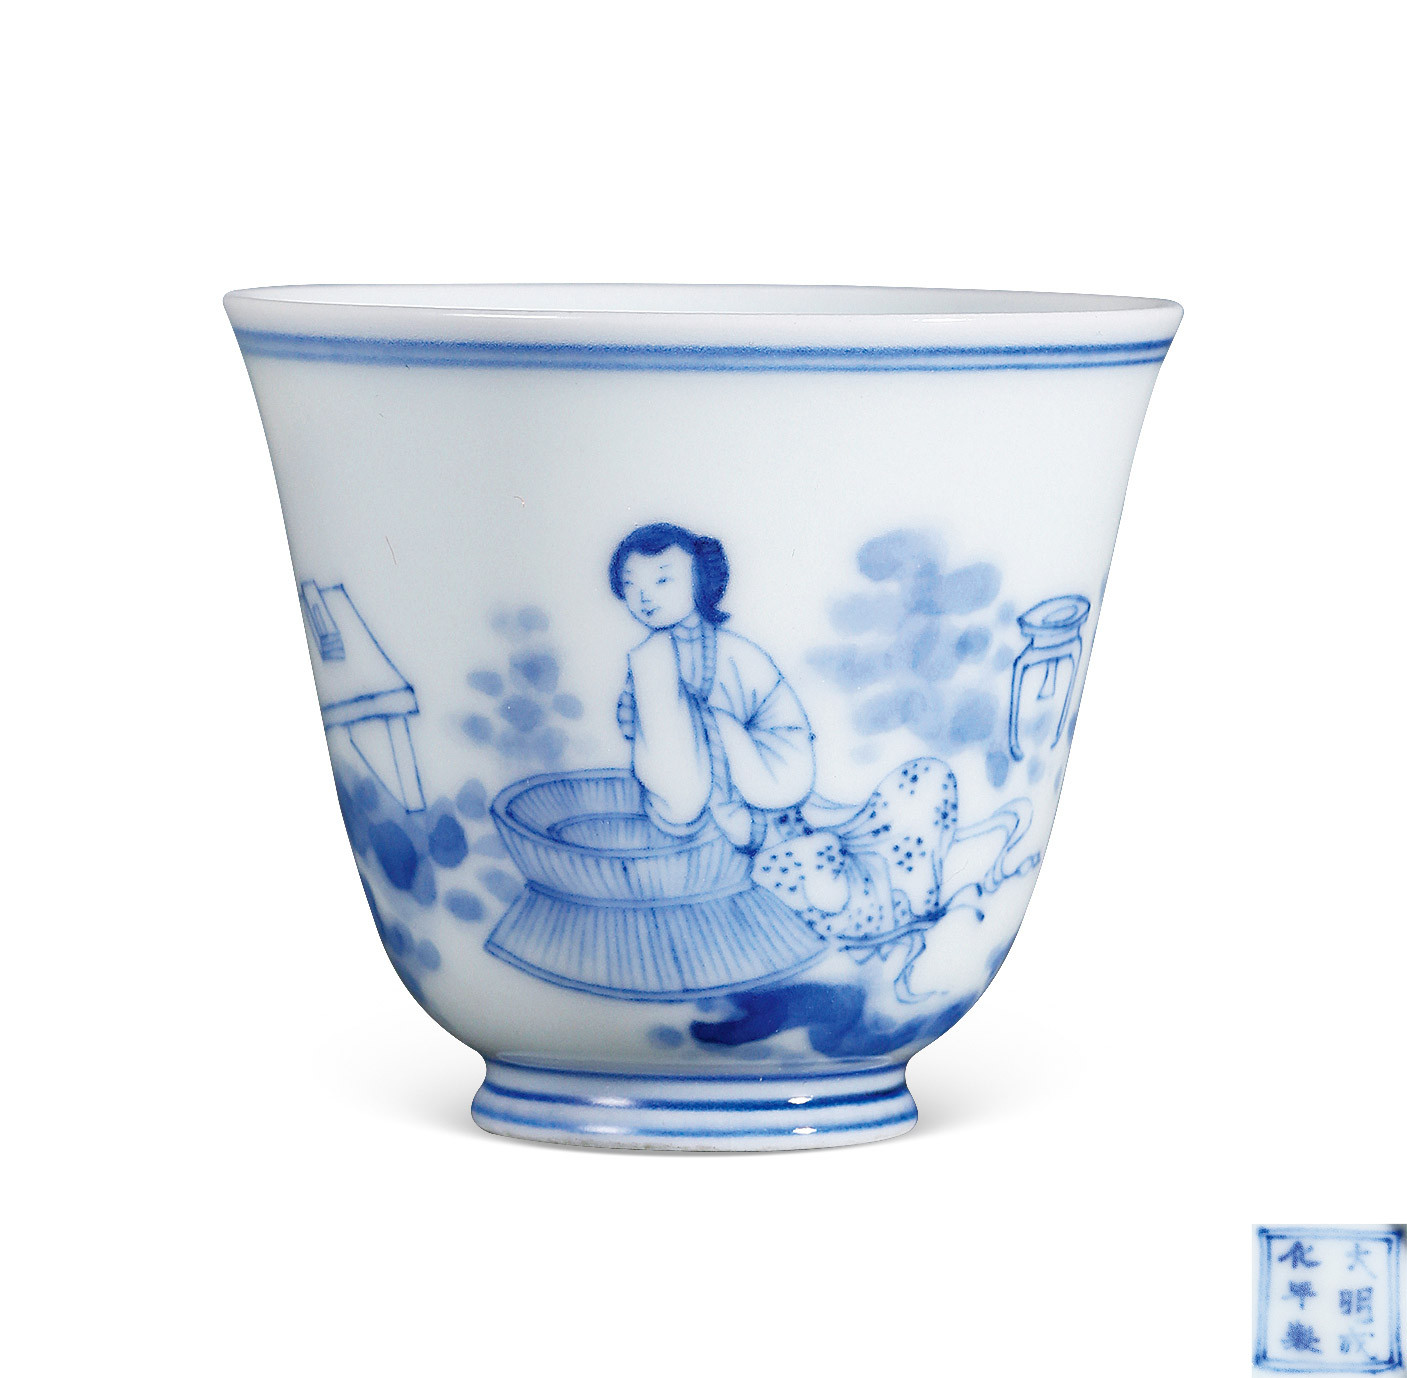 A BLUE AND WHITE CUP WITH LADIES DESIGN